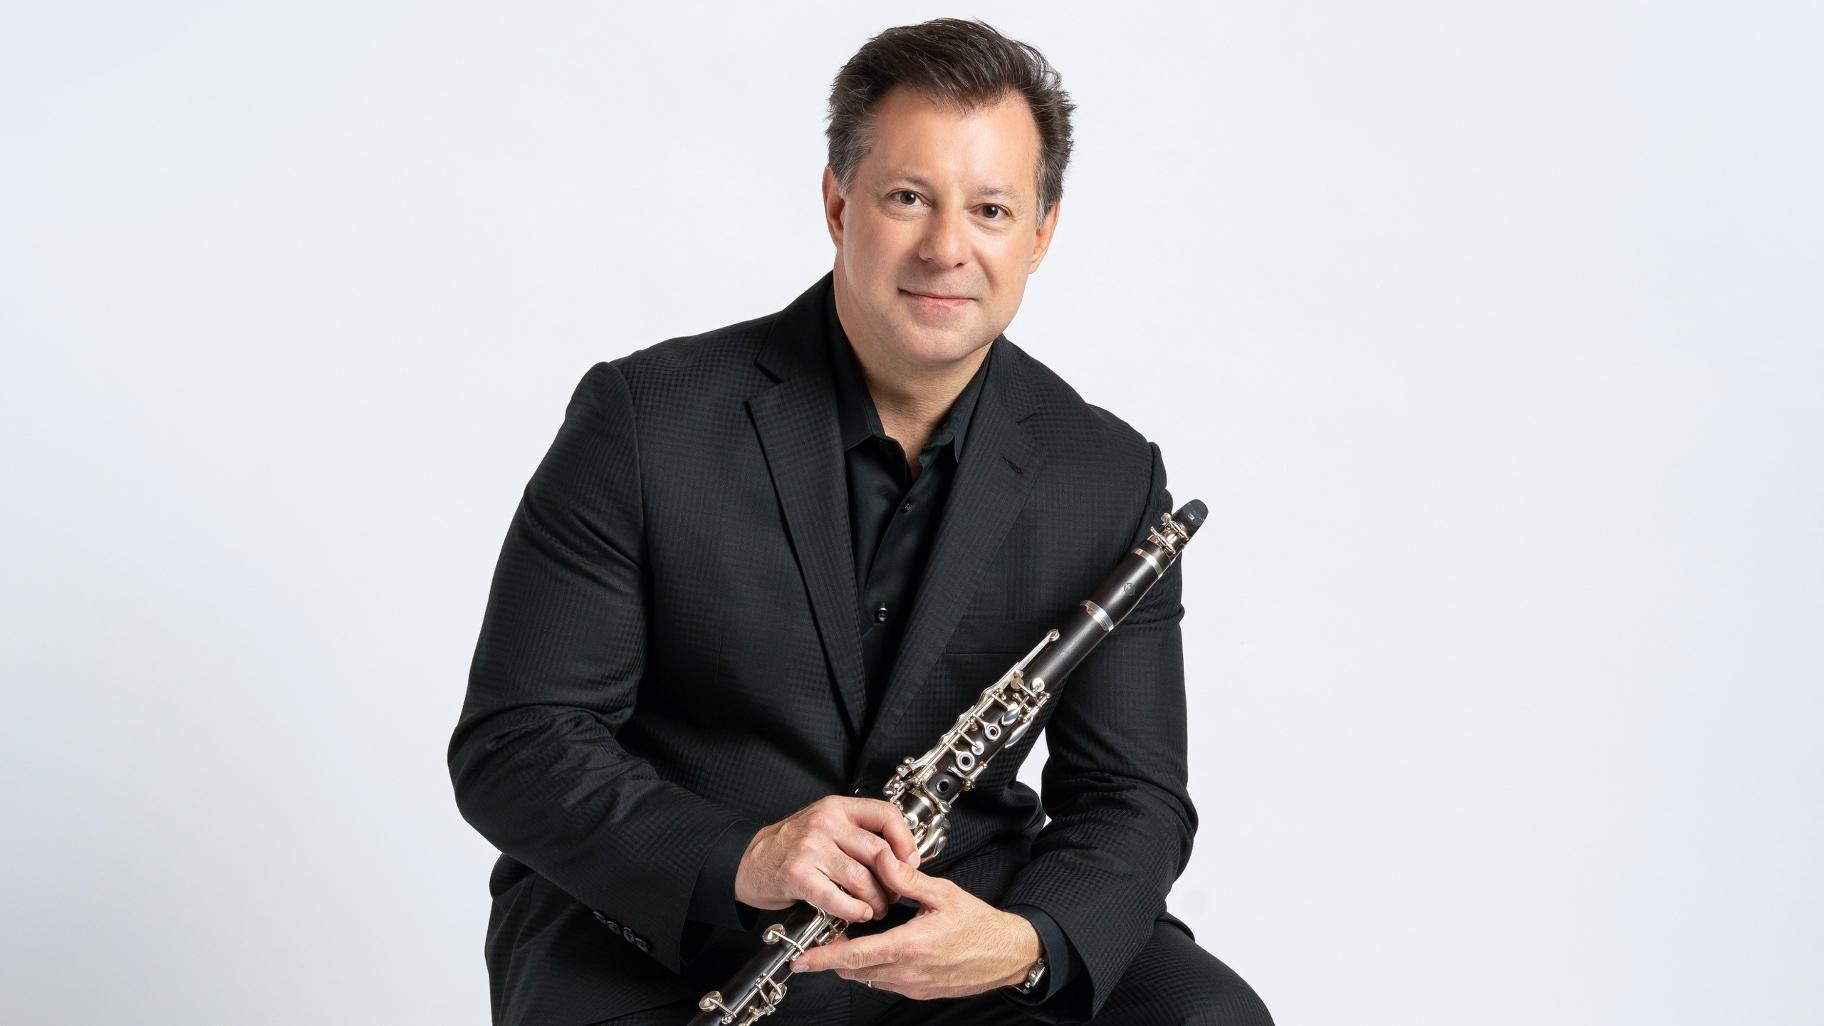 Stephen Williamson, principal clarinetist of the Chicago Symphony Orchestra. (Credit: Todd Rosenberg)